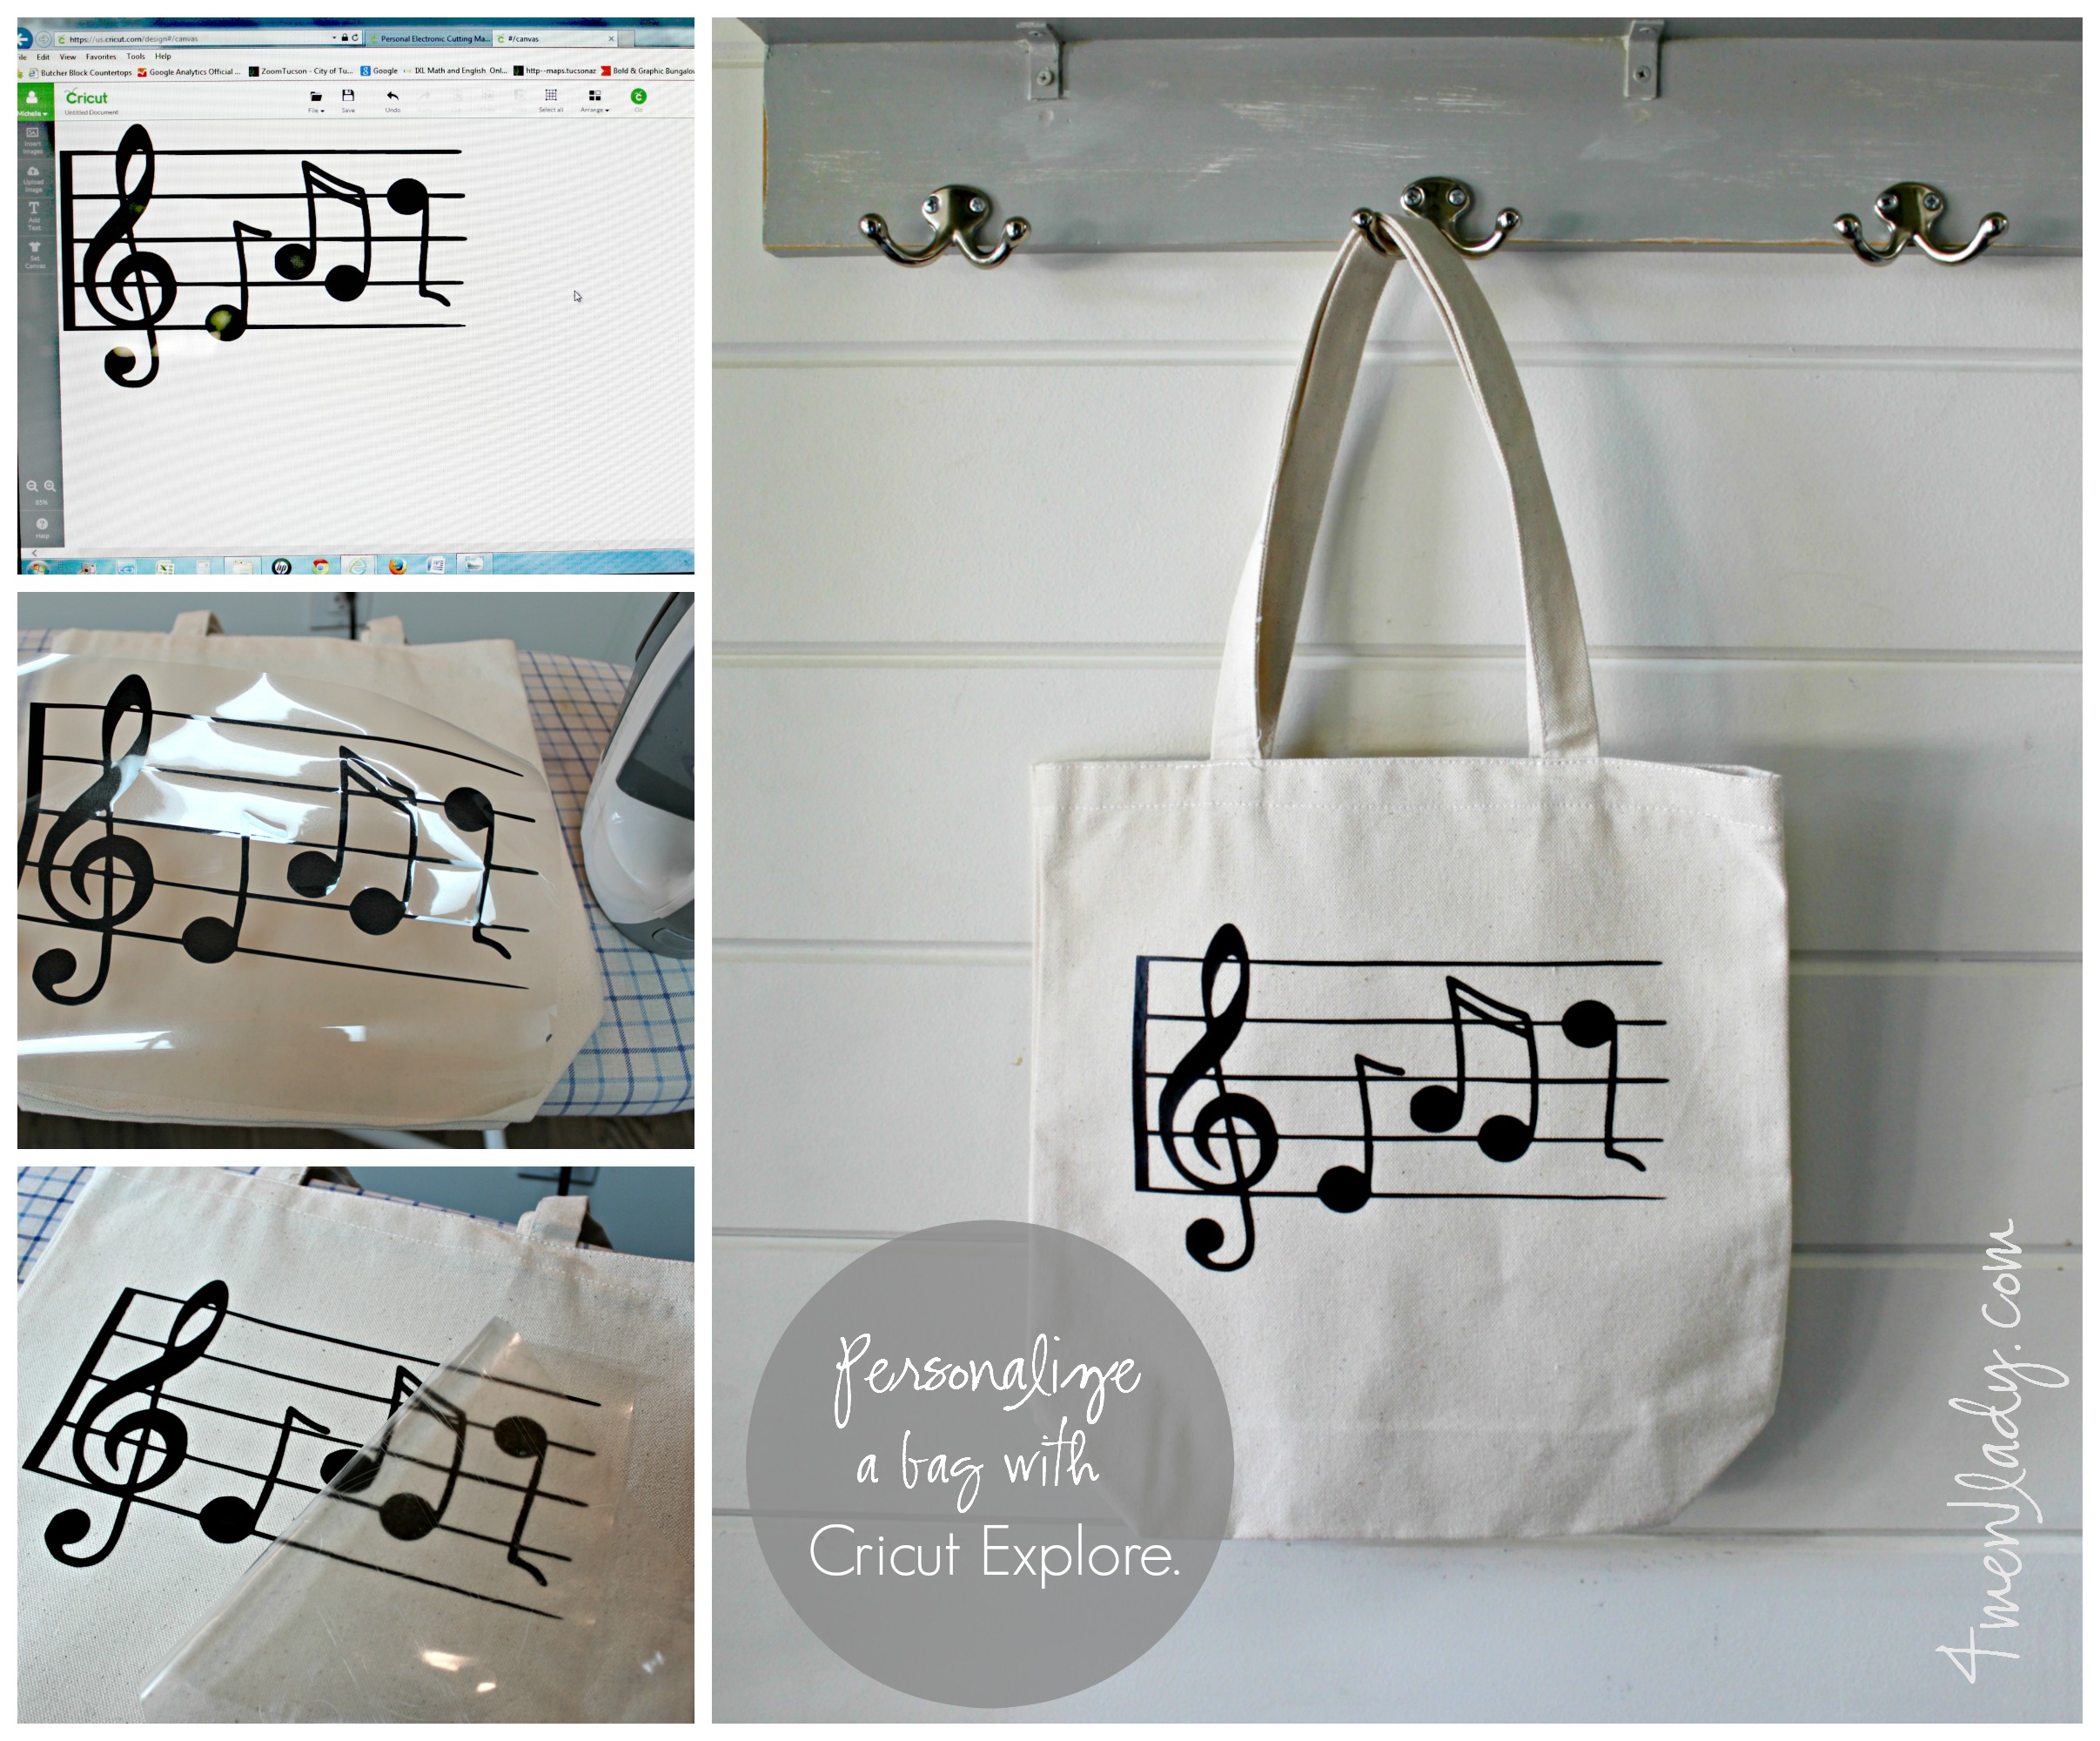 Personalized tote bags made with Cricut Explore (and a breast story).